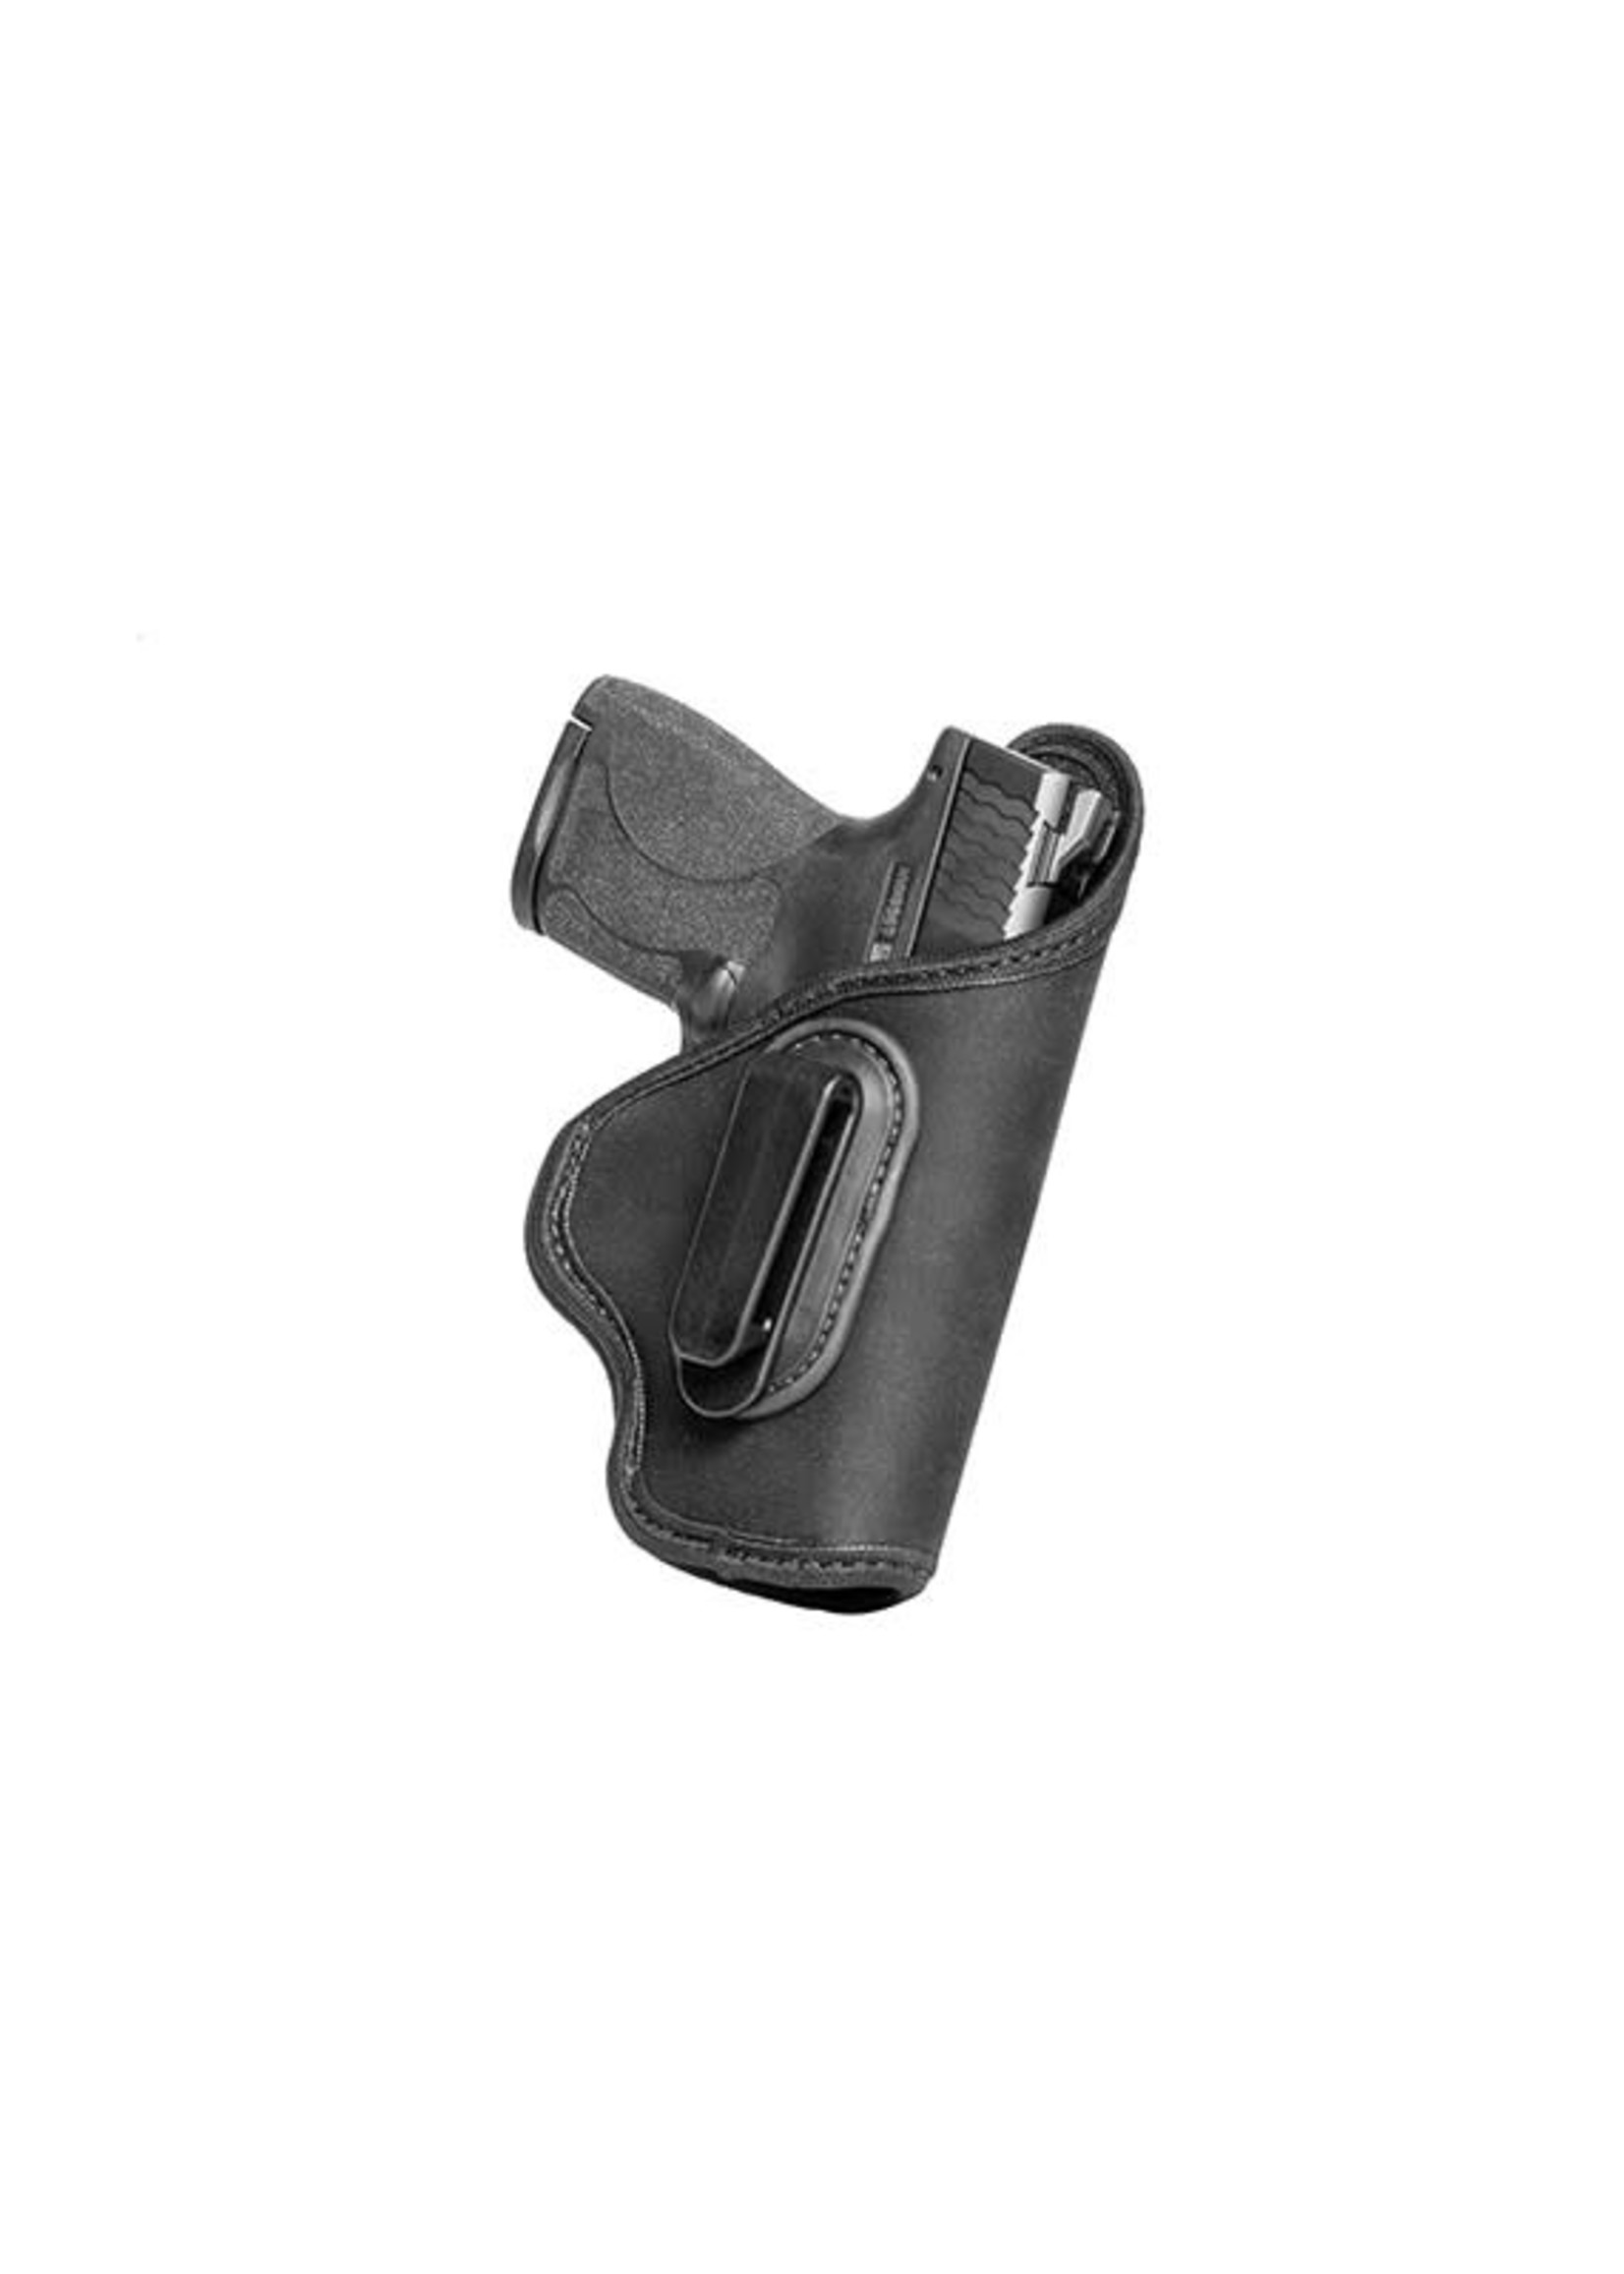 Alien Gear Holsters CLEARANCE  Alien Gear Grip Tuck Universal Holster - Subcompact, LH, Single Stack